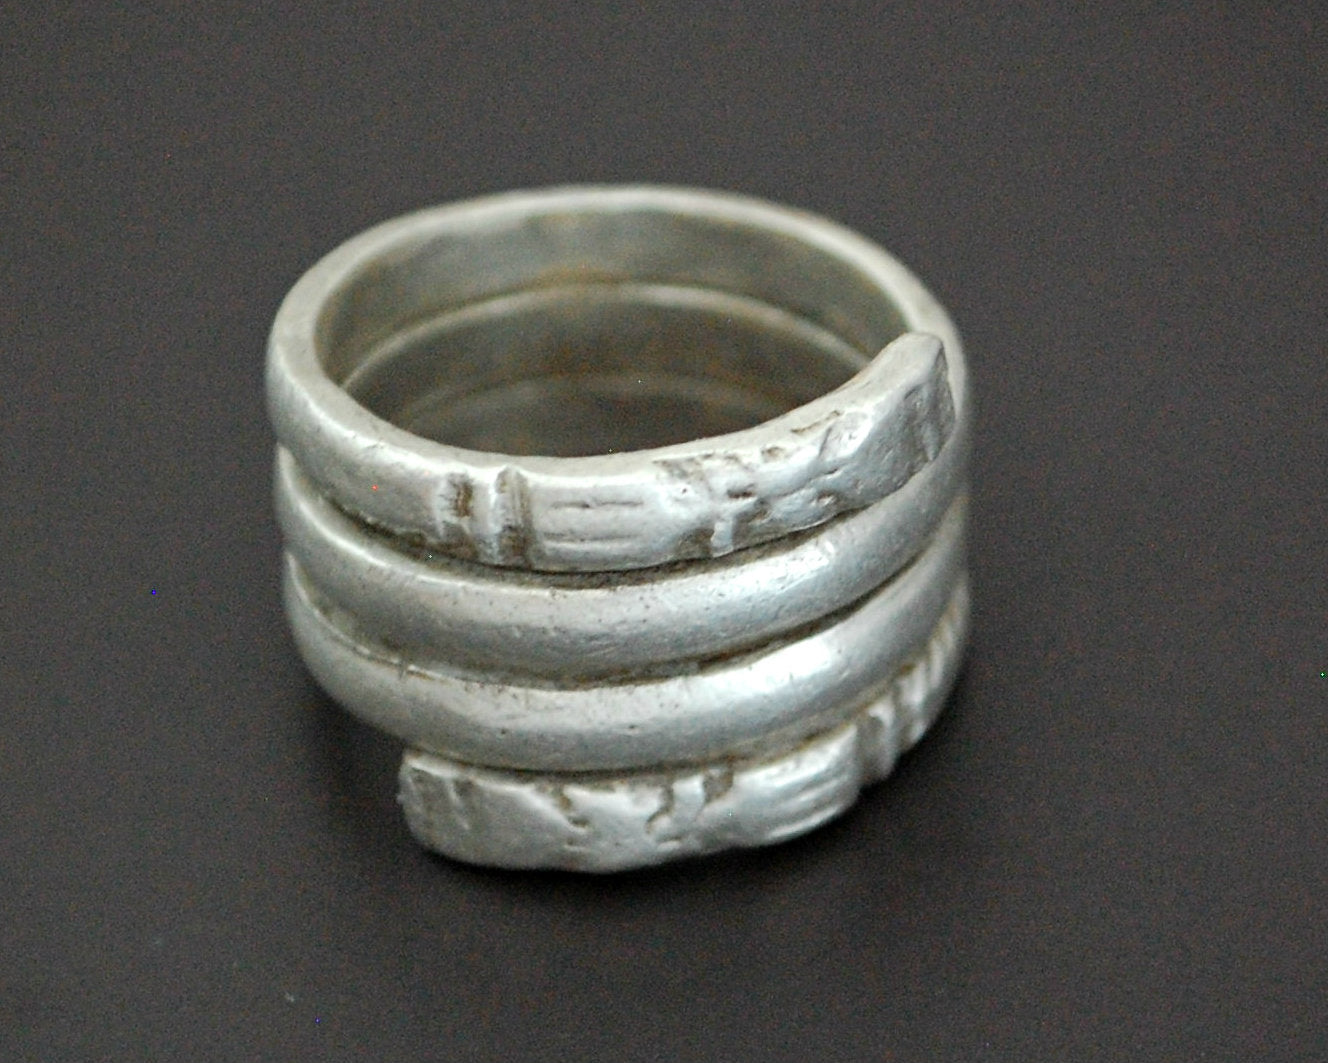 Ethnic Coil Ring from India - Size 8